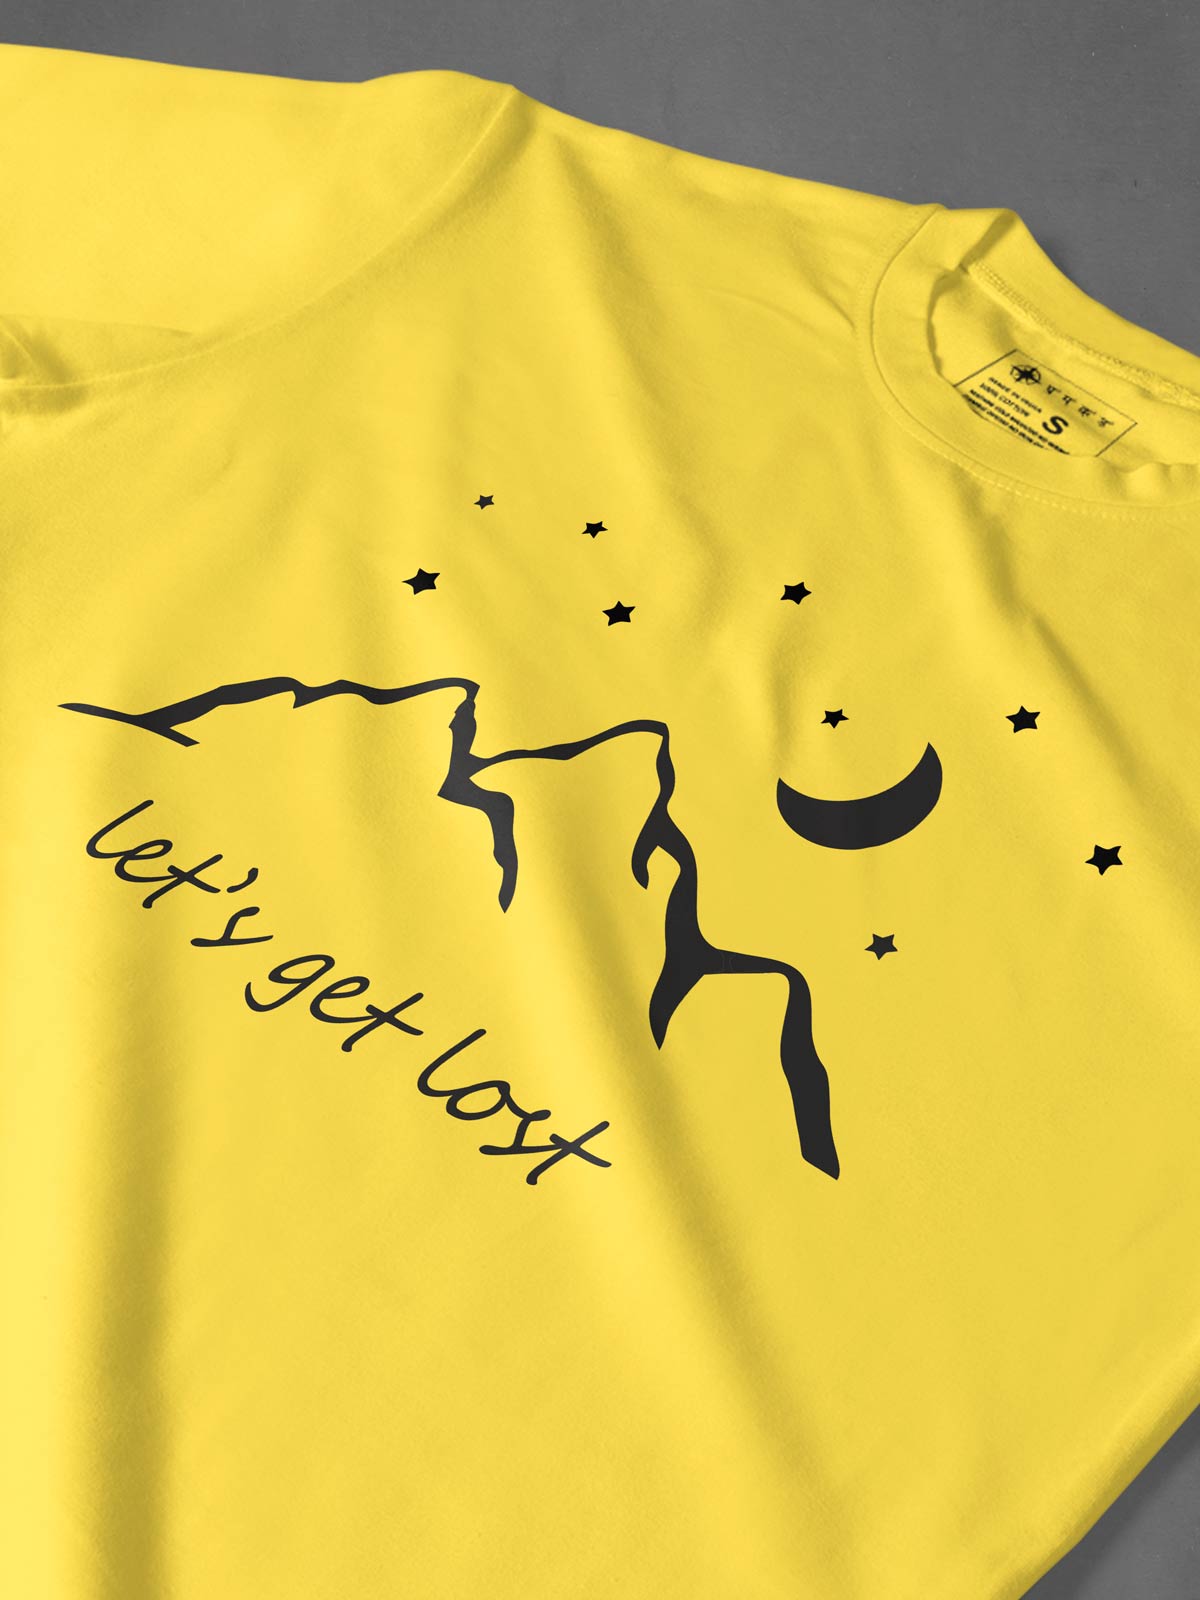 Lets-get-lost-printed-t-shirt-for-men by Ghumakkad